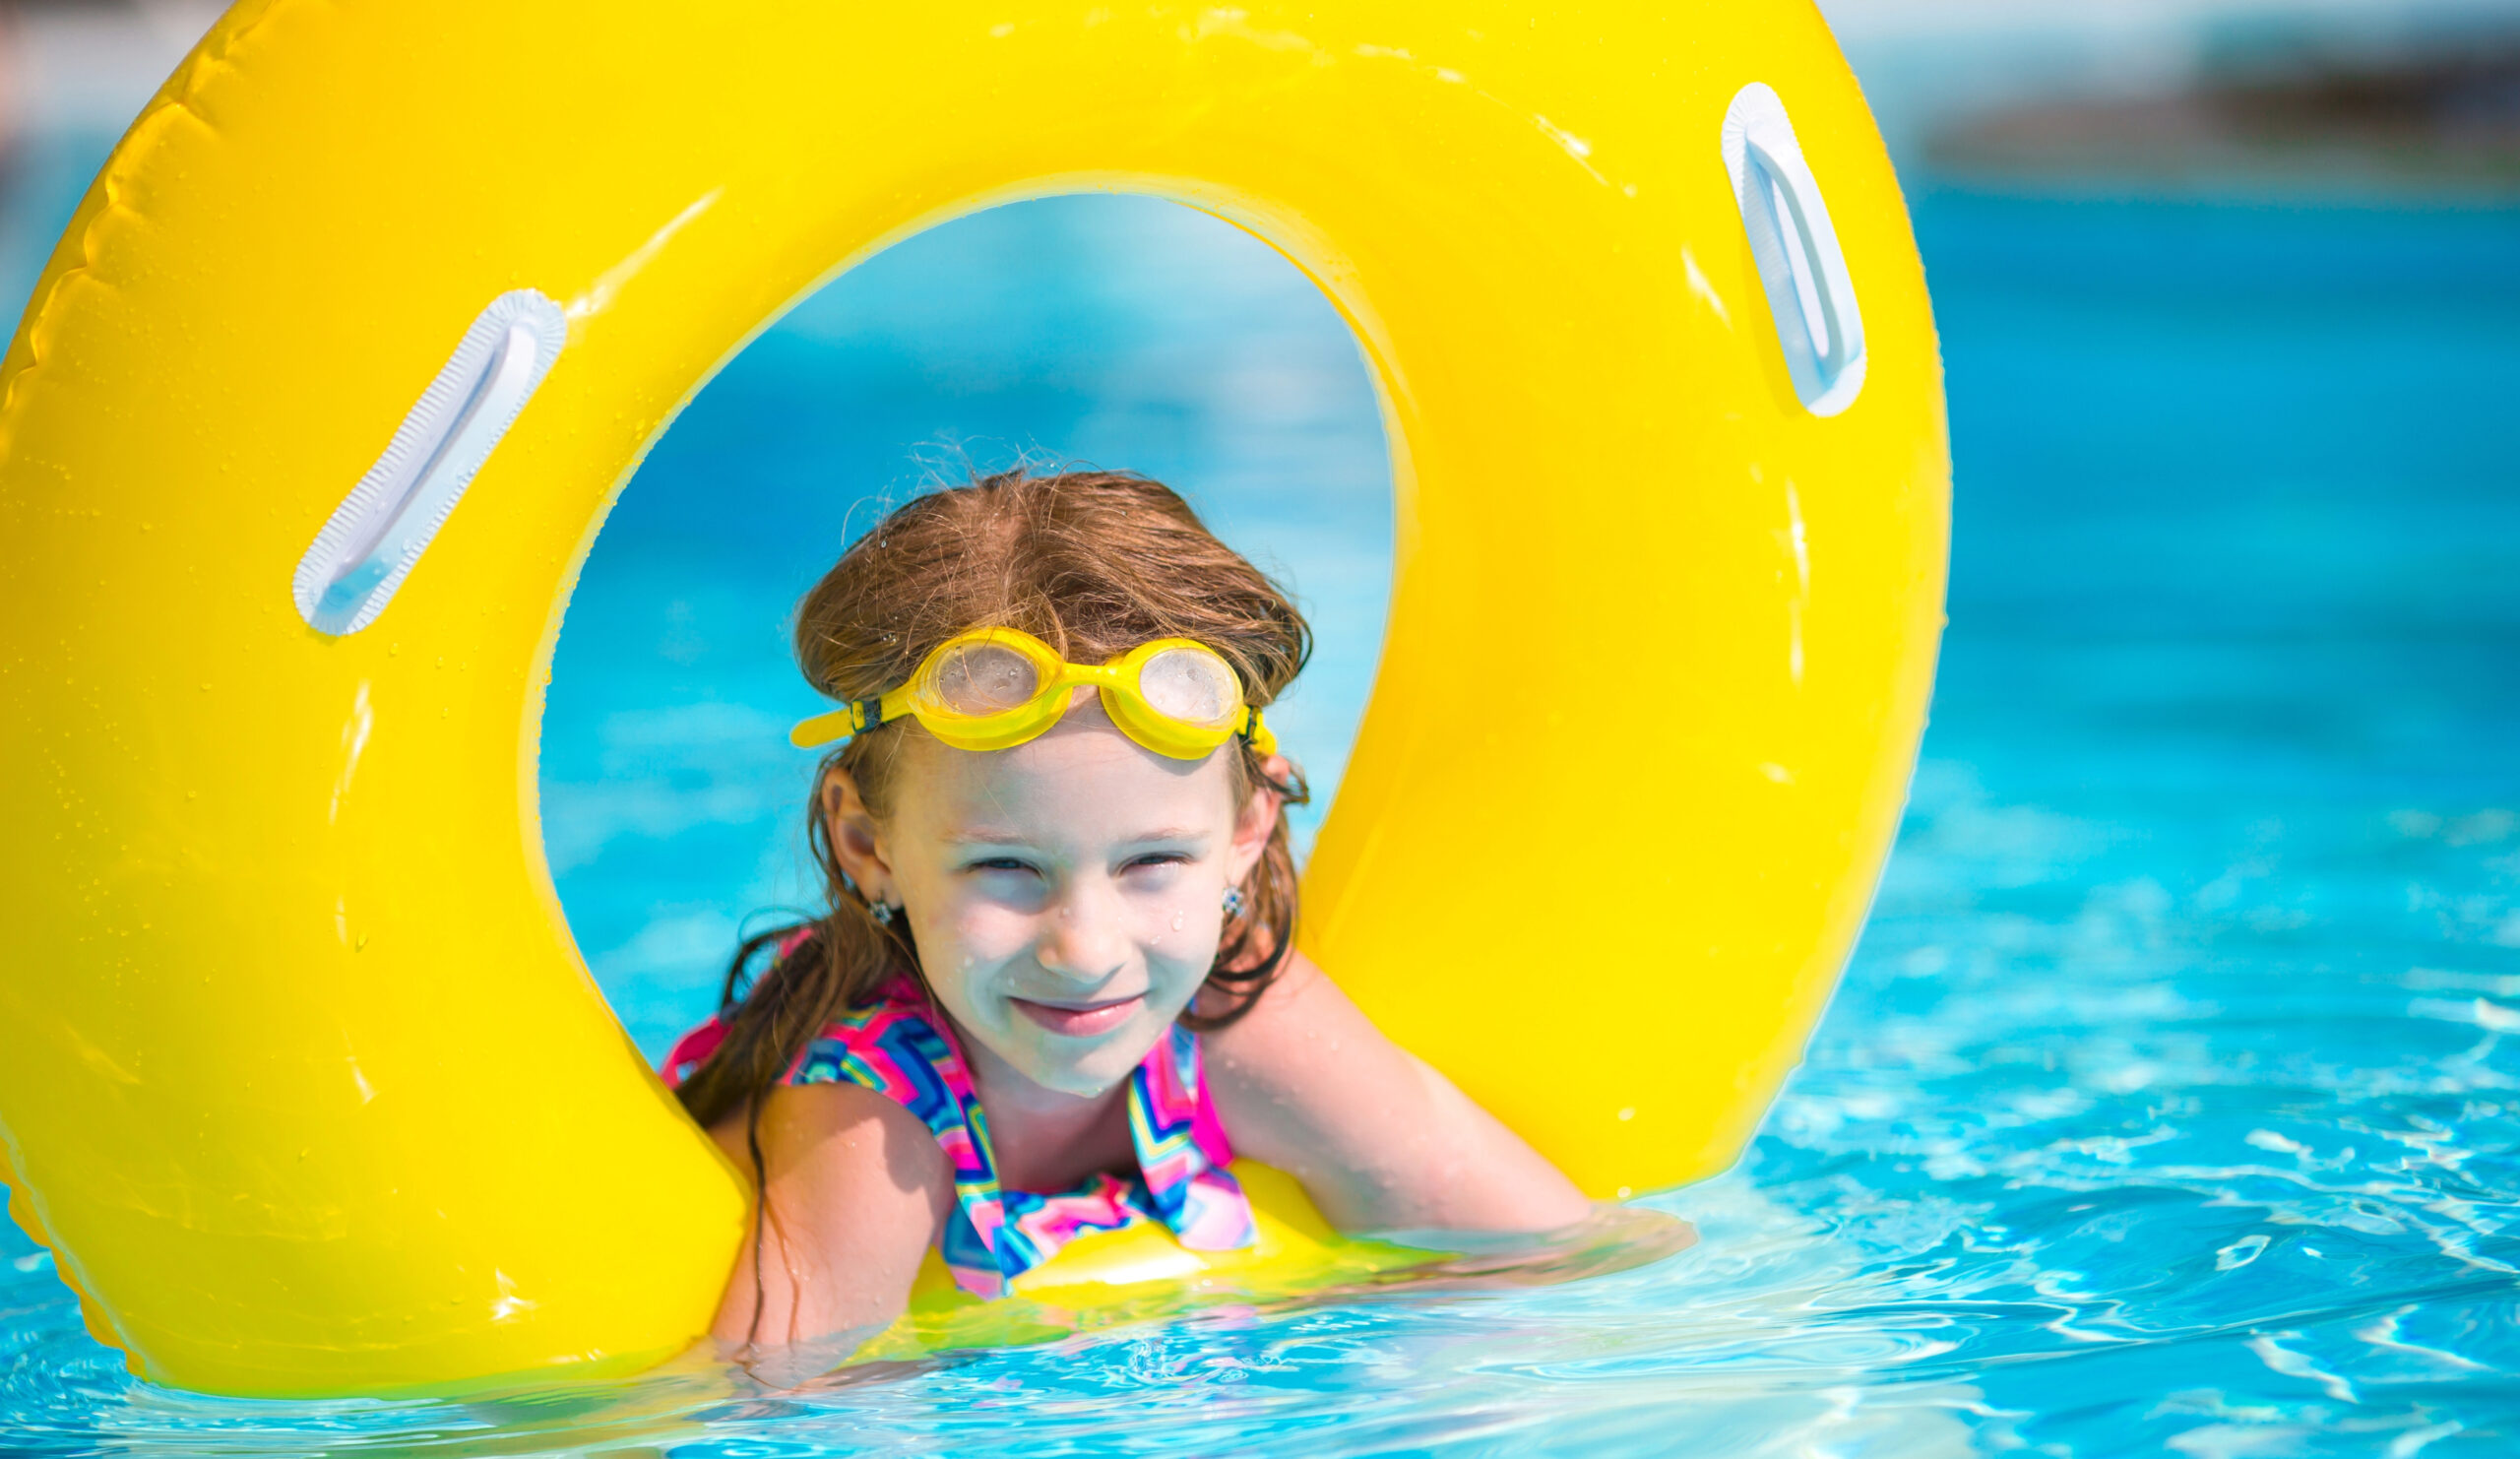 Girl in pool with yellow float